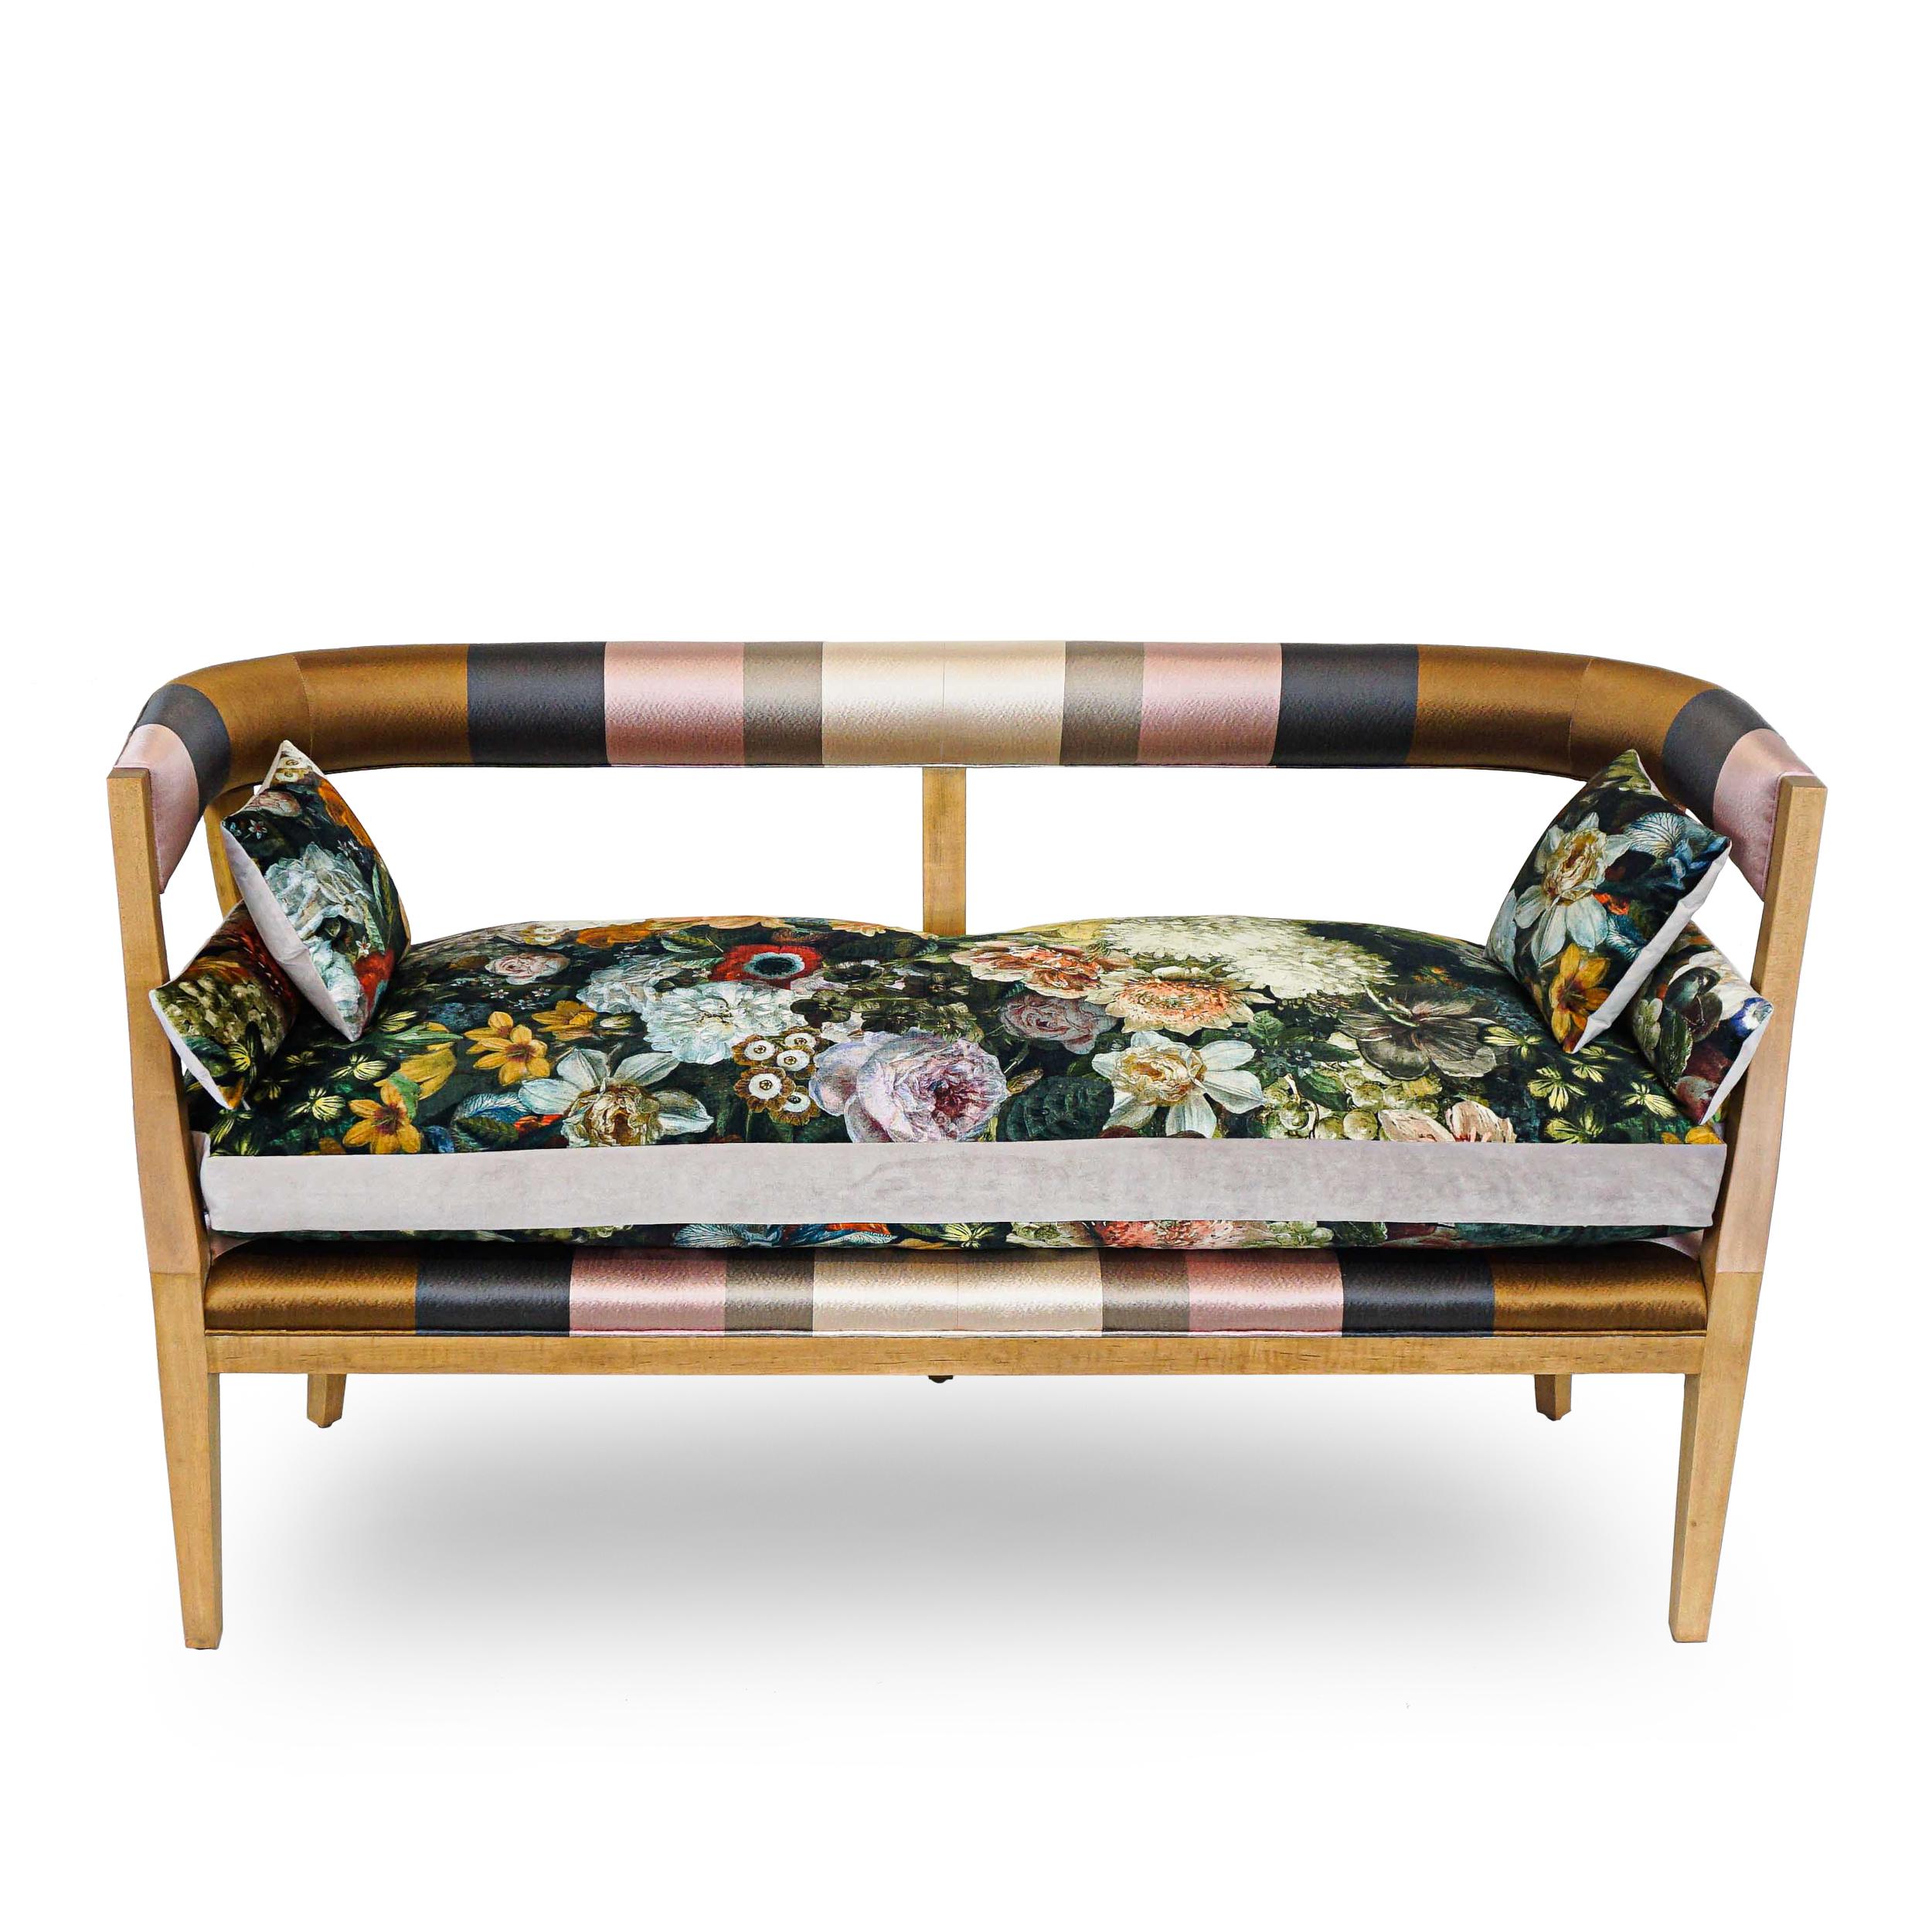 American Japanese Inspired Bench For Sale